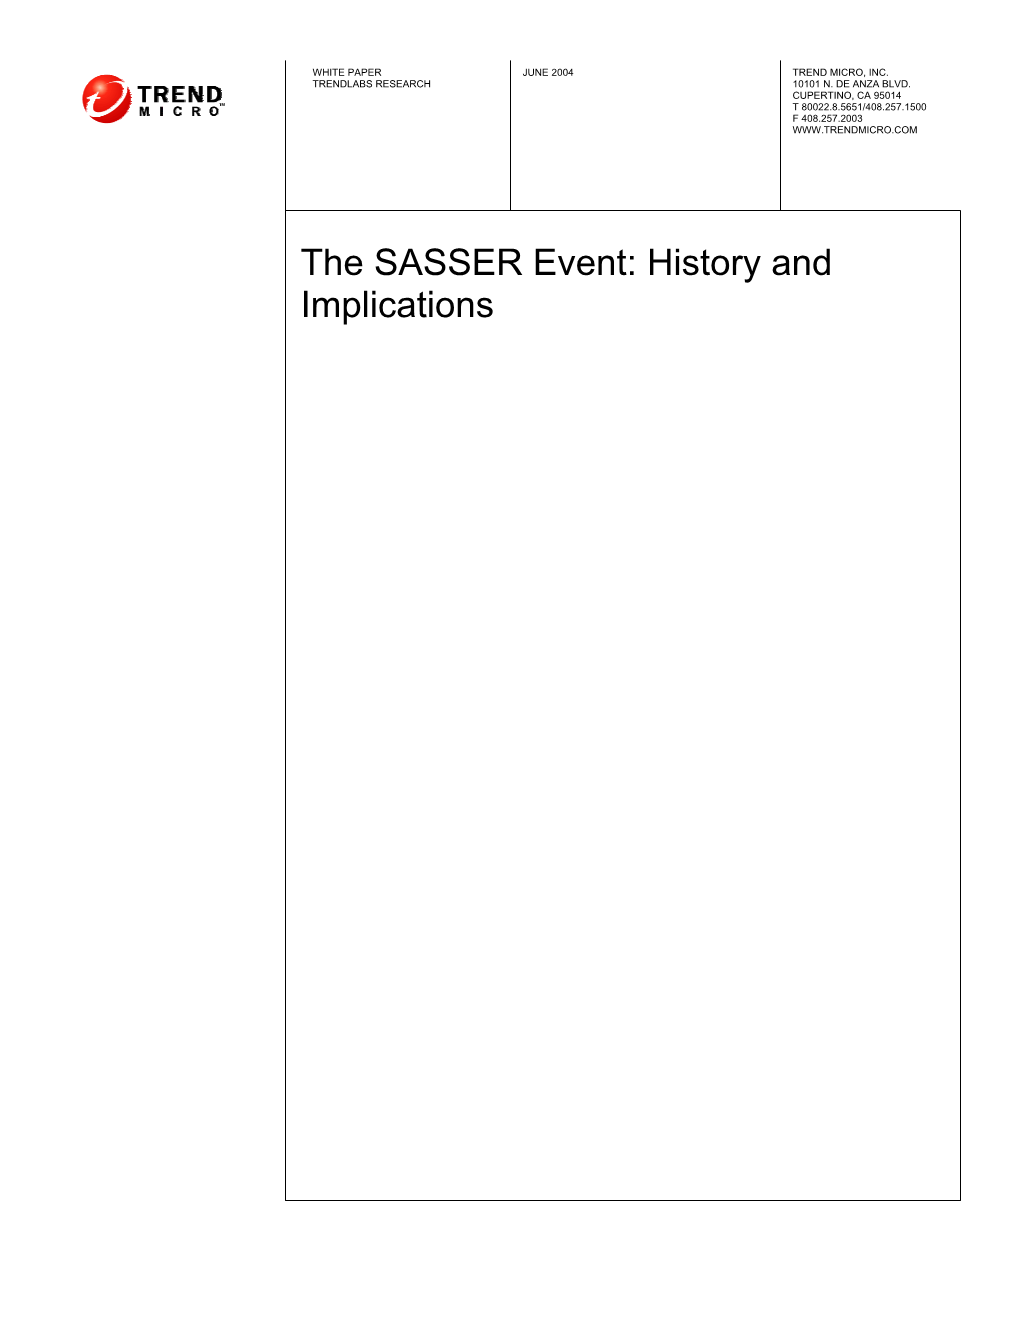 The SASSER Event: History and Implications.Pdf